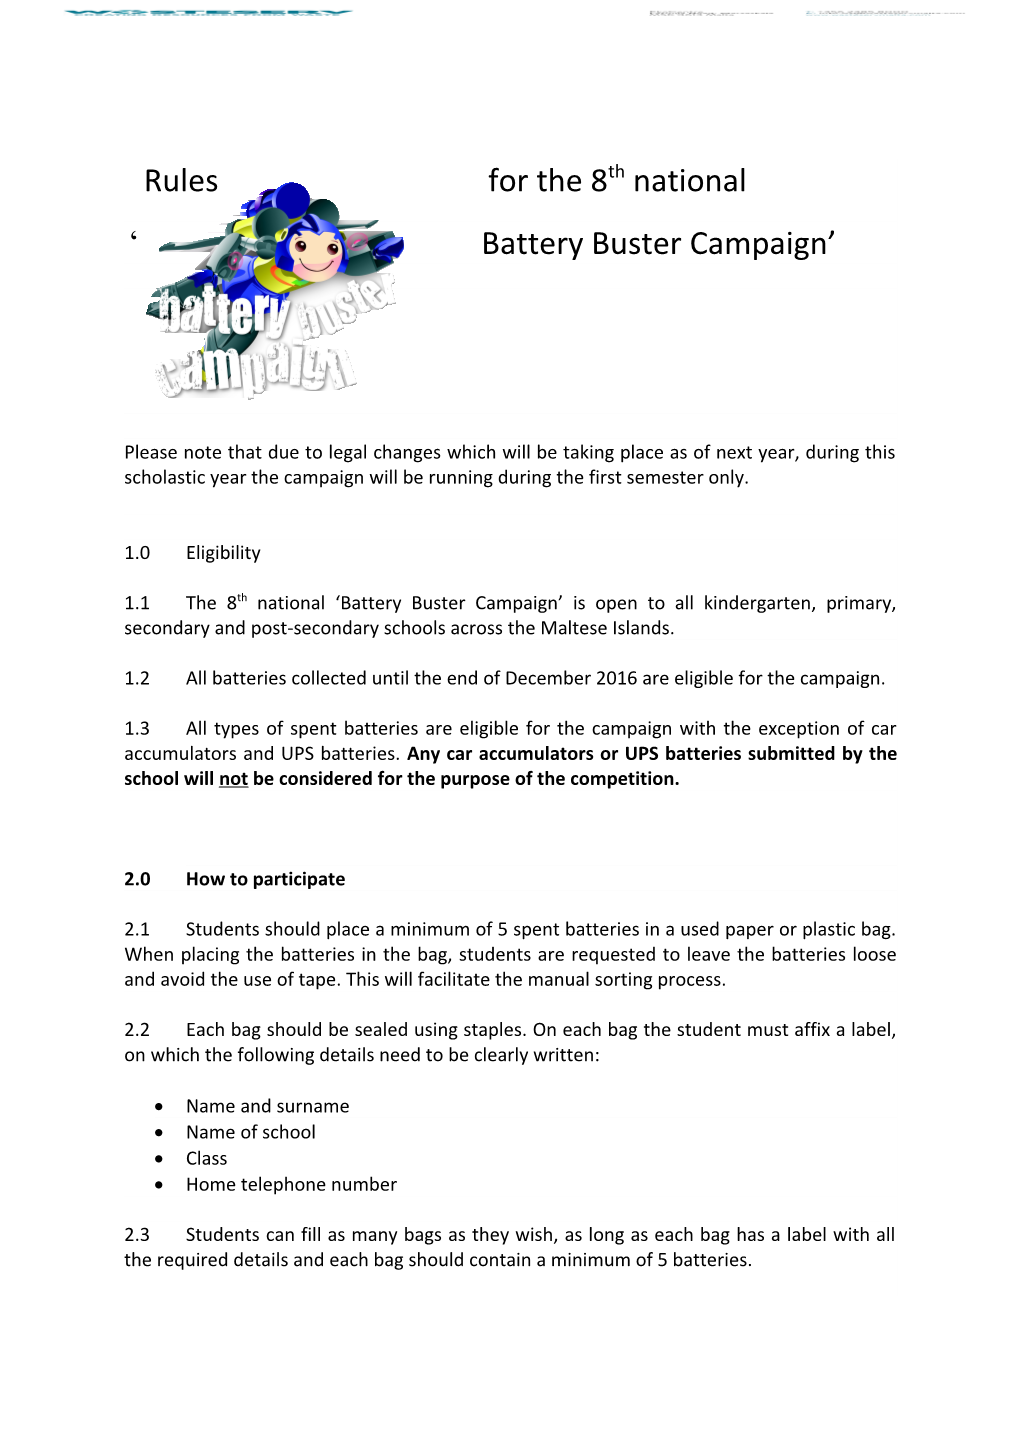 Battery Buster Campaign